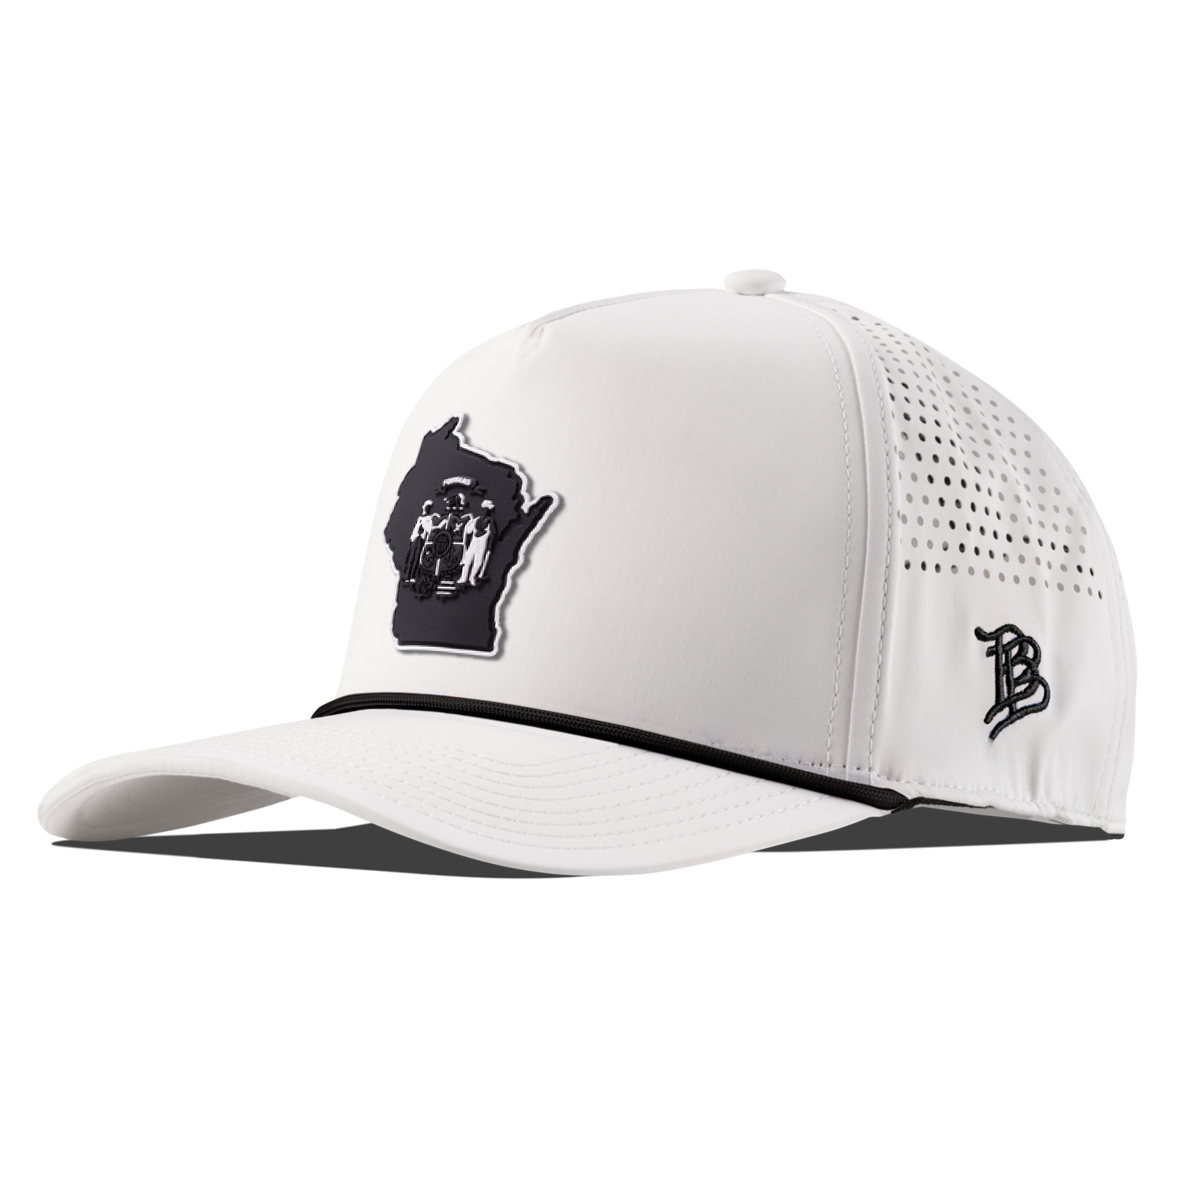 Wisconsin Vintage Curved 5 Panel Performance White/Black